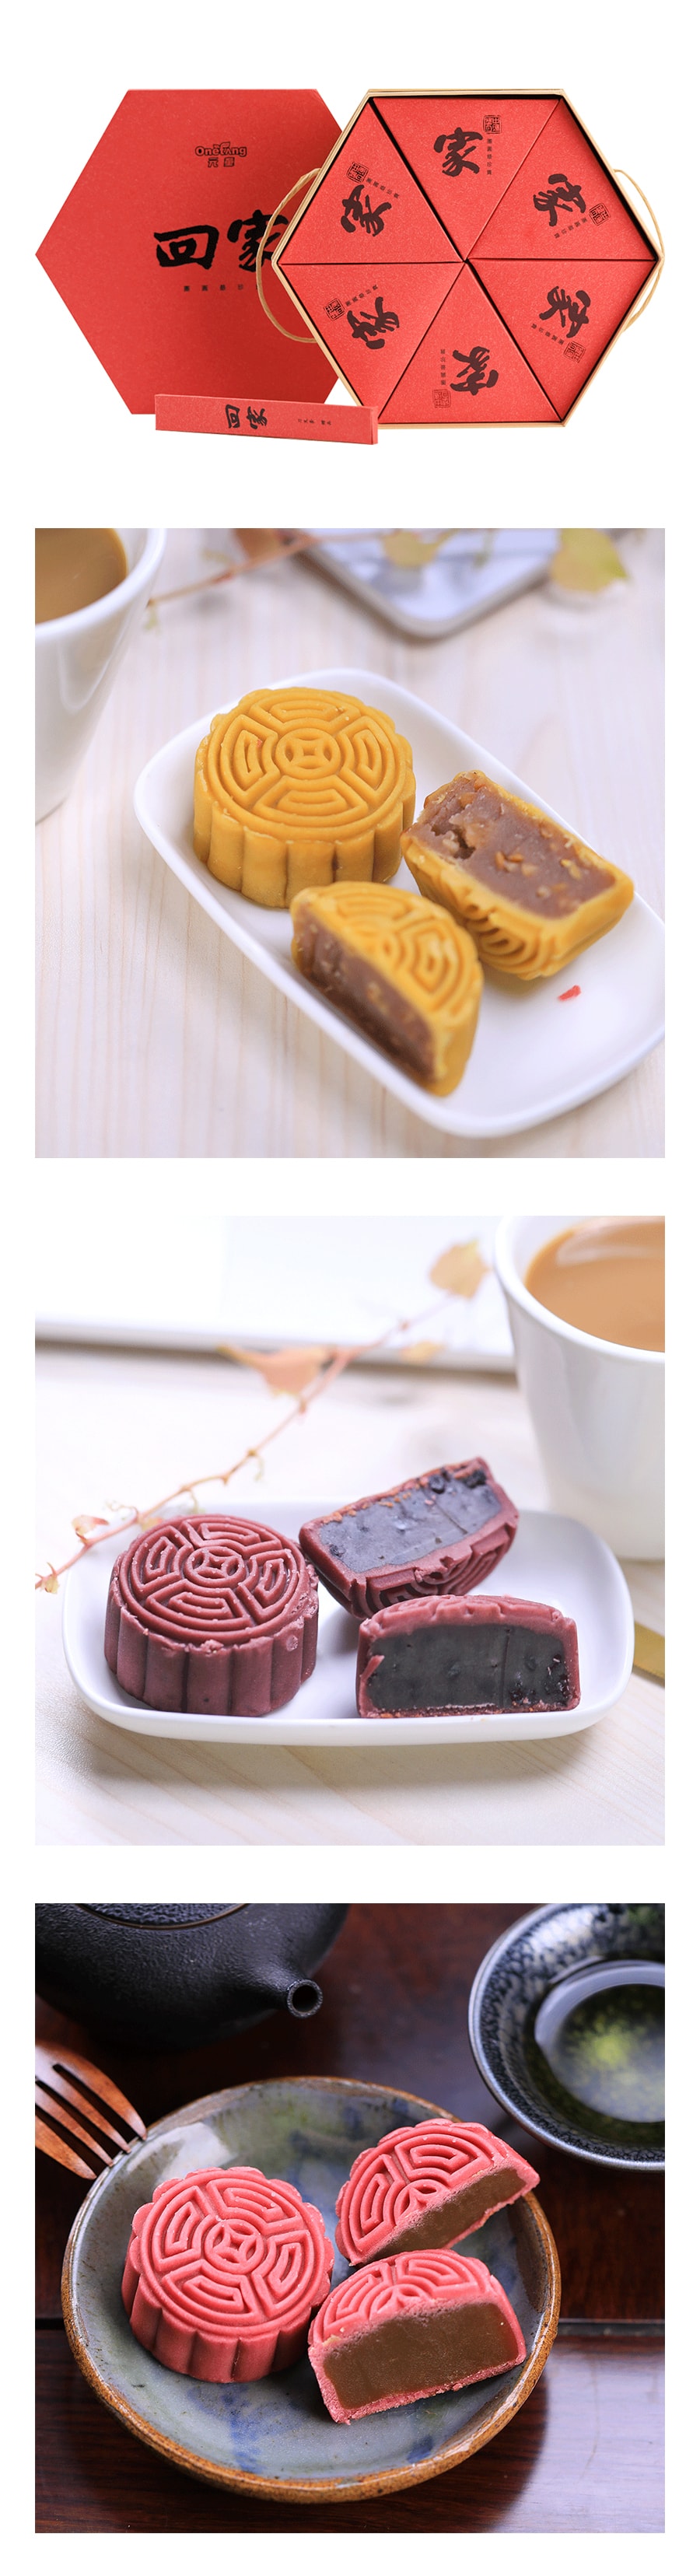 ONETENG Moon Cake Assorted Momoyama Style 300g 【Delivery Date: Mid August】